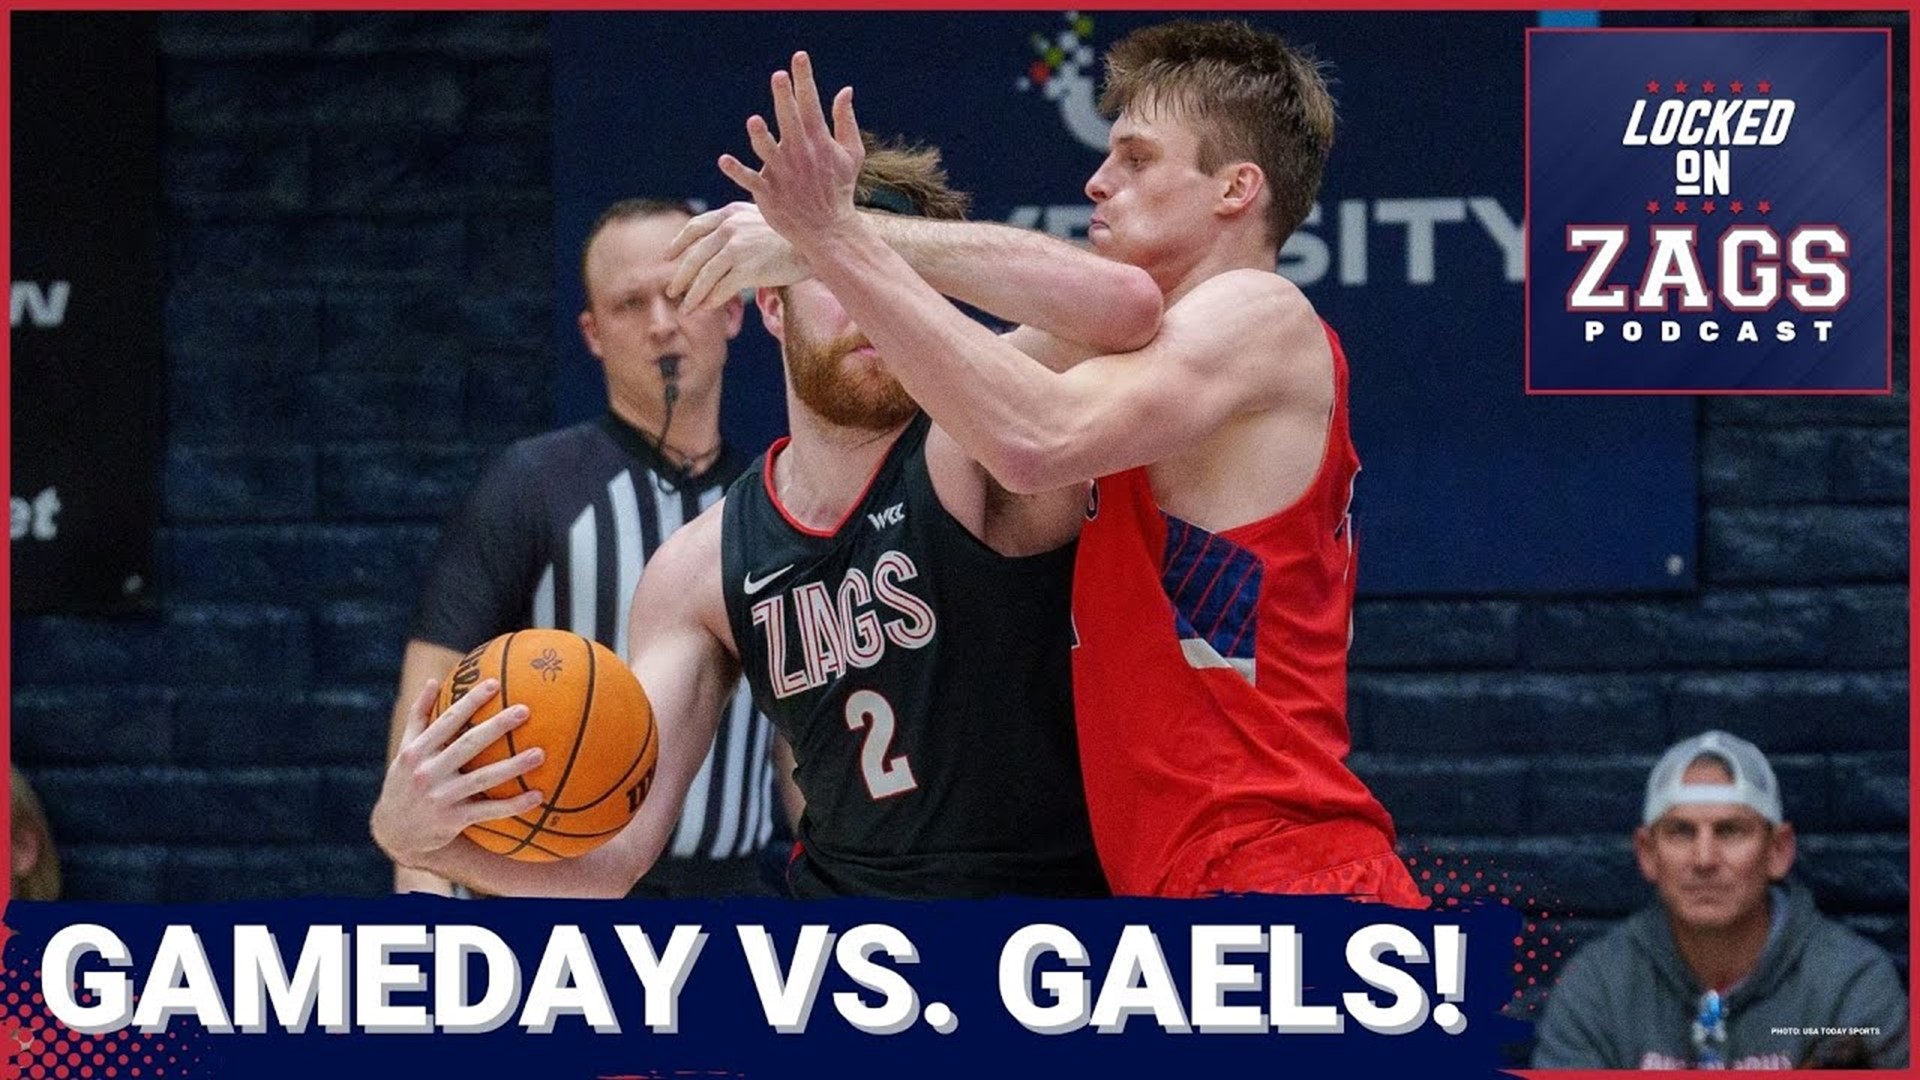 We look at five keys for Gonzaga to secure a much-needed victory over Saint Mary's and a tie in the WCC standings.